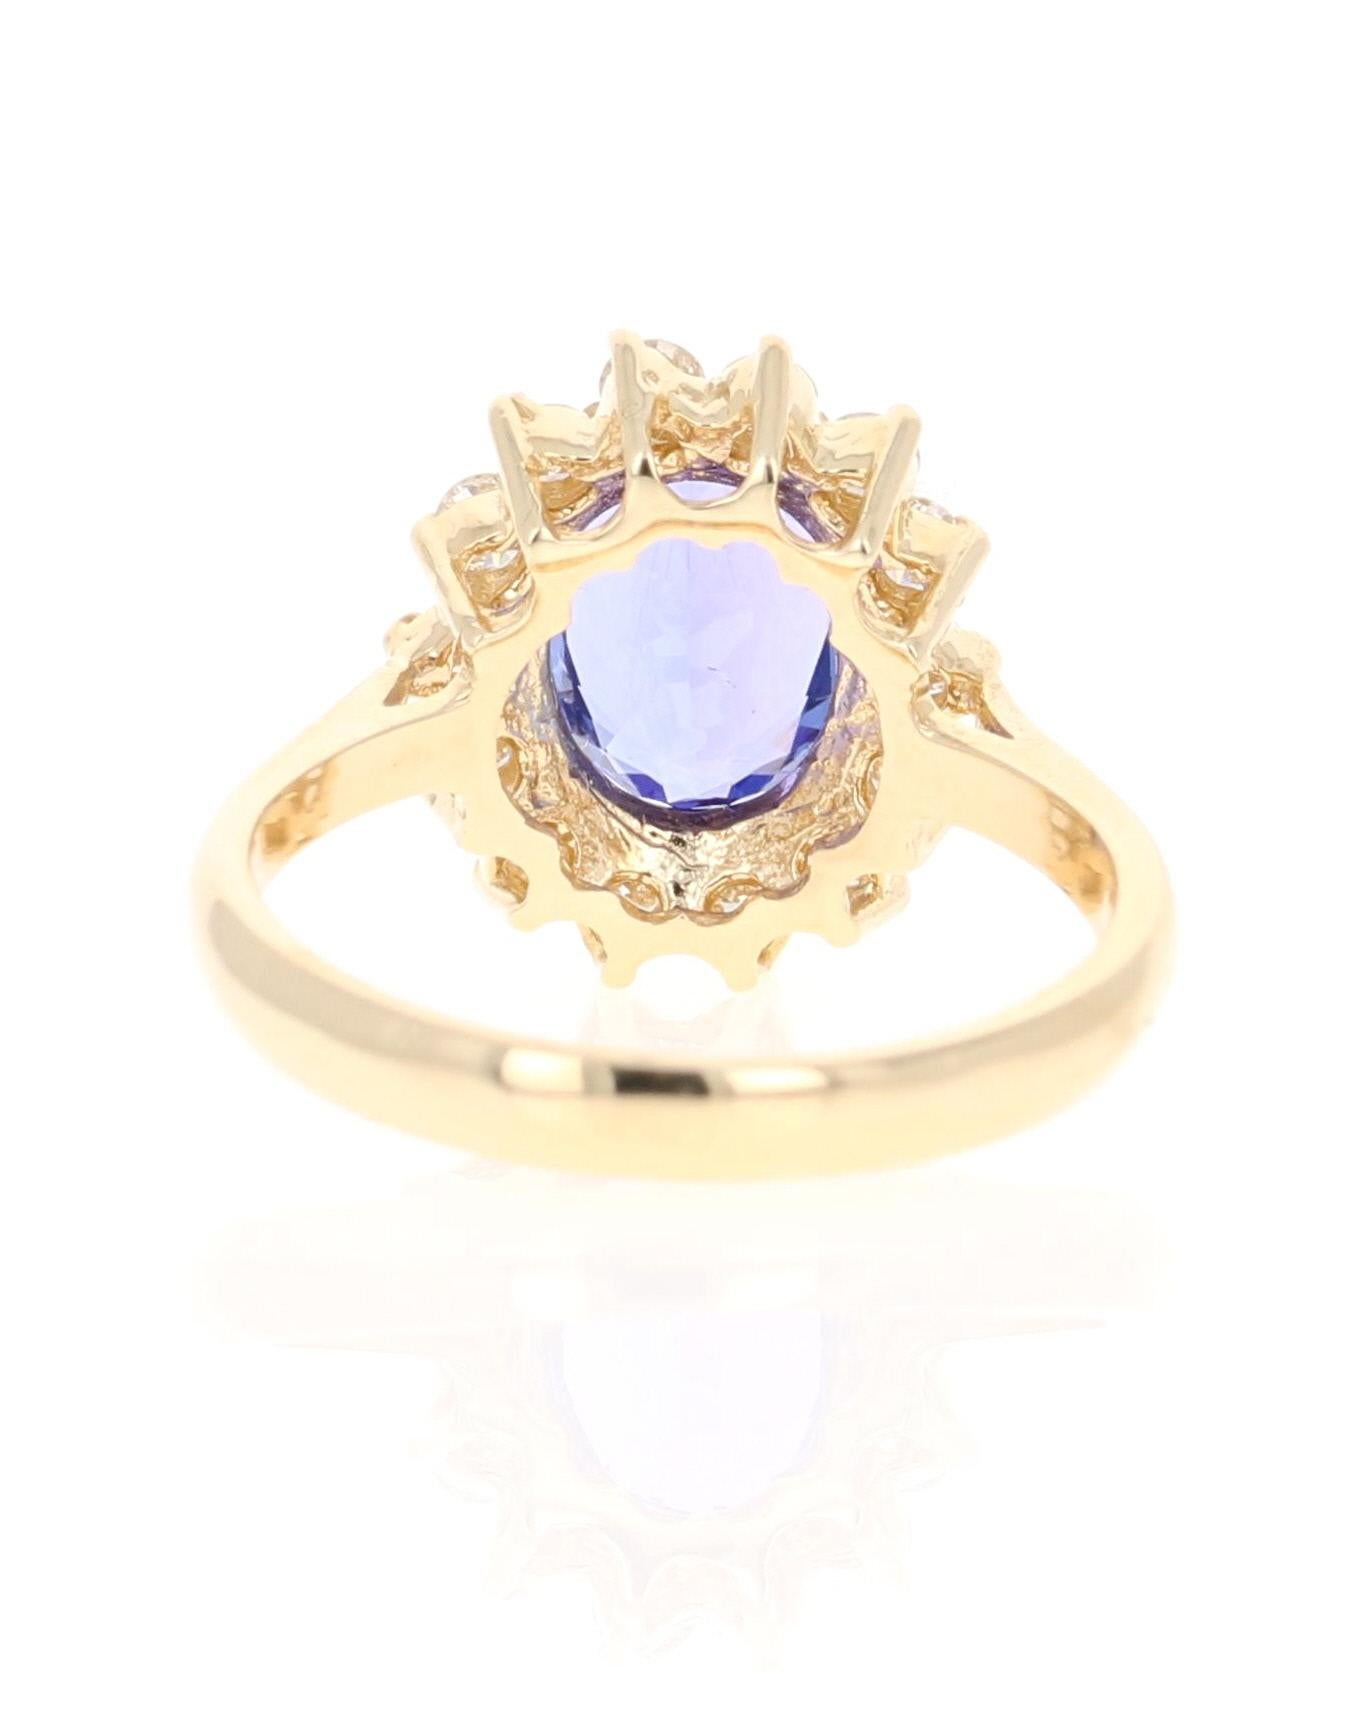 2.59 Carat Oval Cut Tanzanite Diamond 14 Karat Yellow Gold Ring In New Condition For Sale In Los Angeles, CA